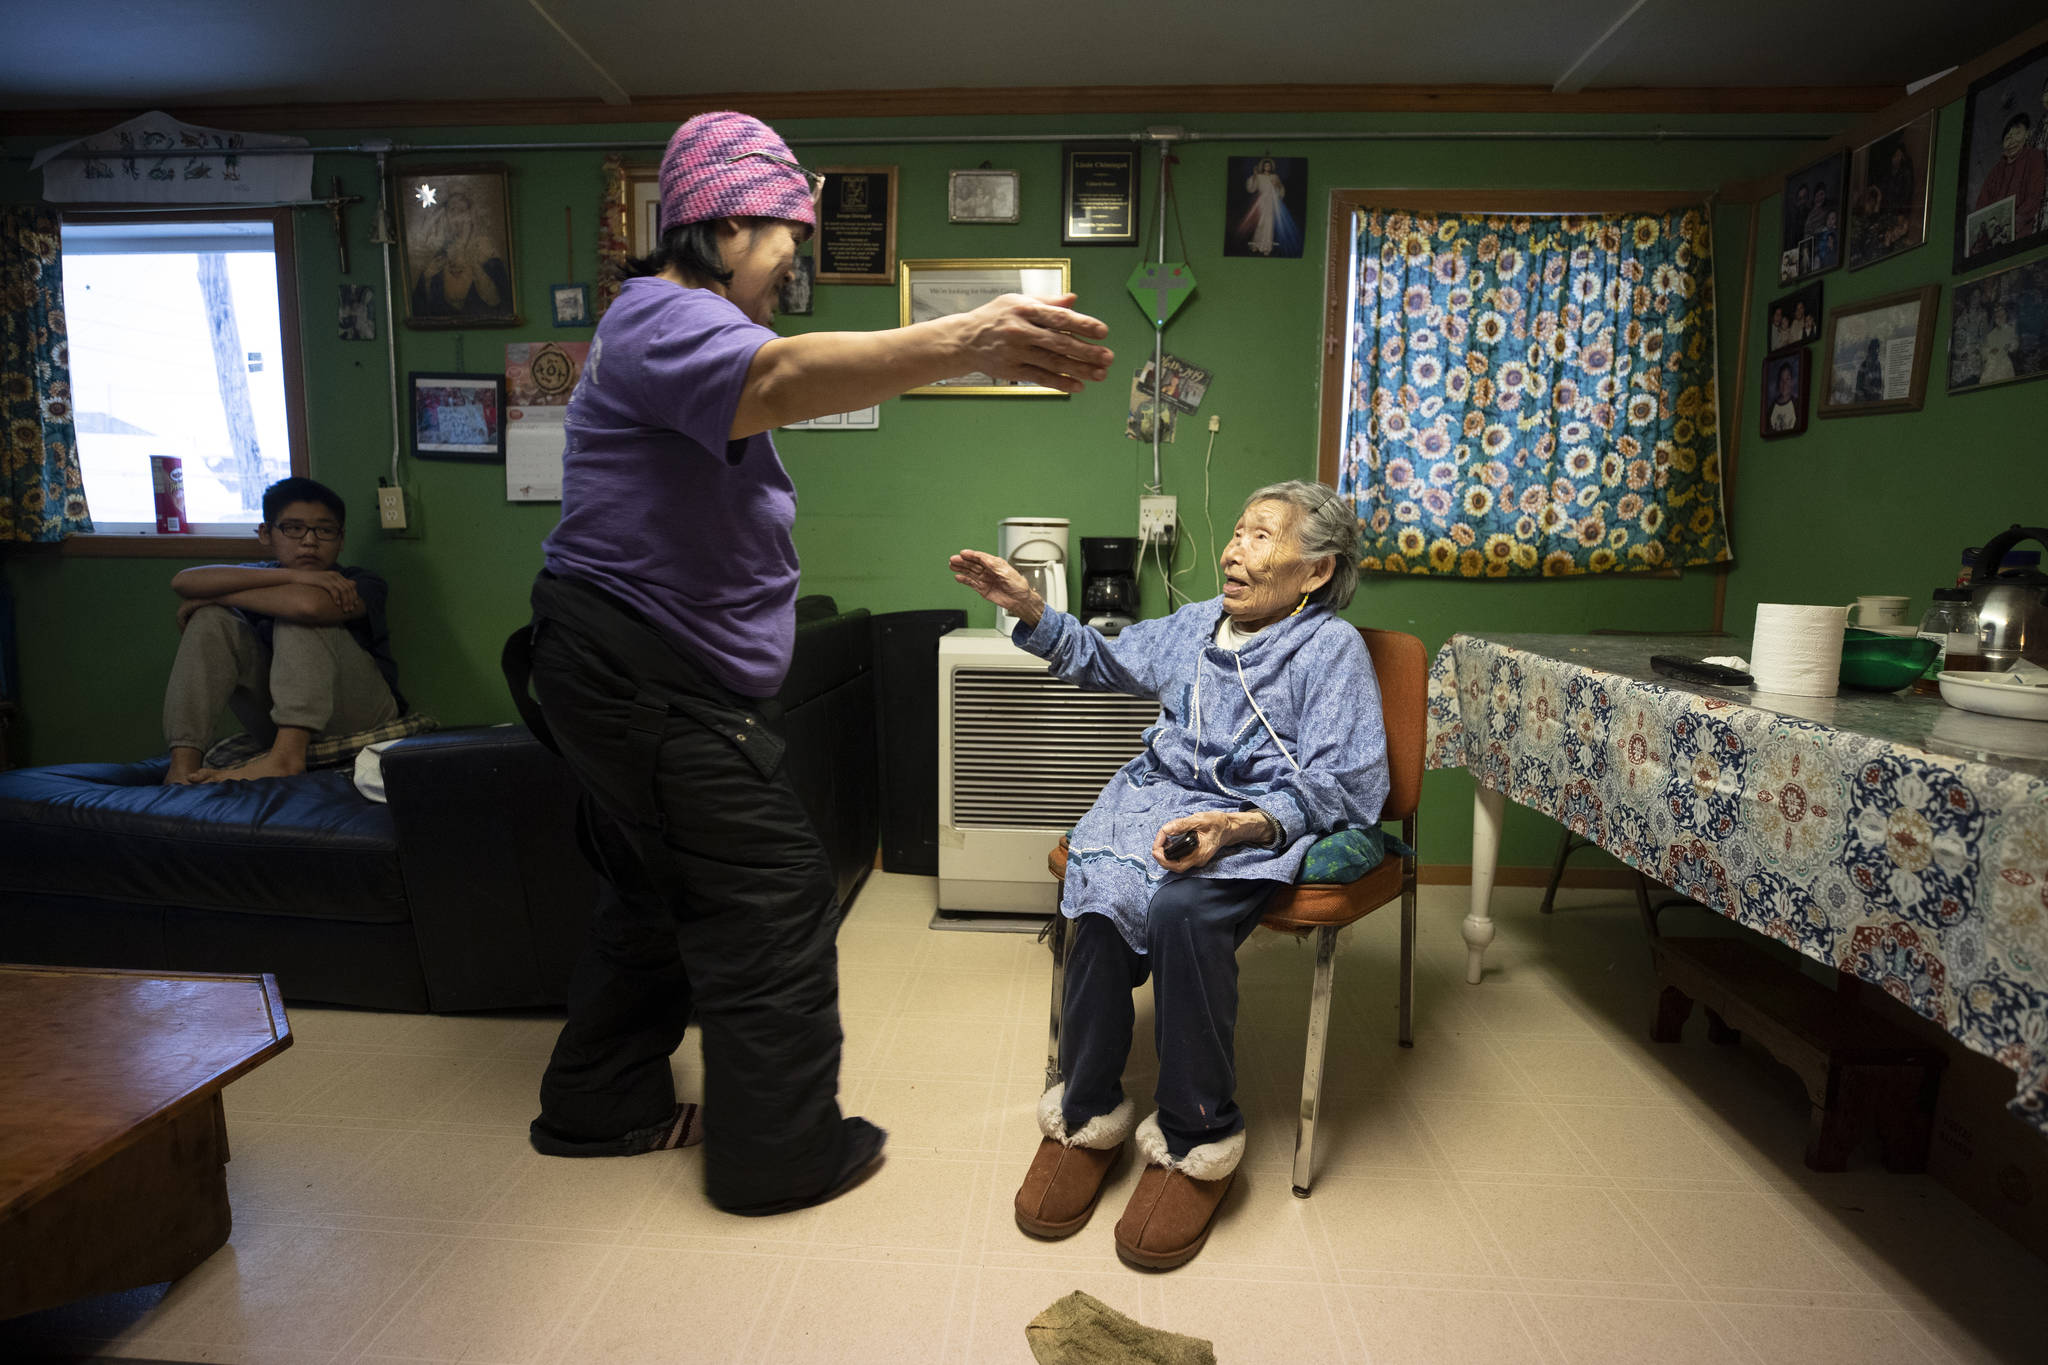 In this Monday, Jan. 20, 2020 image, Lizzie Chimiugak, right, gets a hug from her granddaughter Janet Lawrence at her home in Toksook Bay, Alaska. Chimiugak, who turned 90 years old on Monday, is scheduled to be the first person counted in the 2020 U.S. Census on Tuesday. (AP Photo/Gregory Bull)